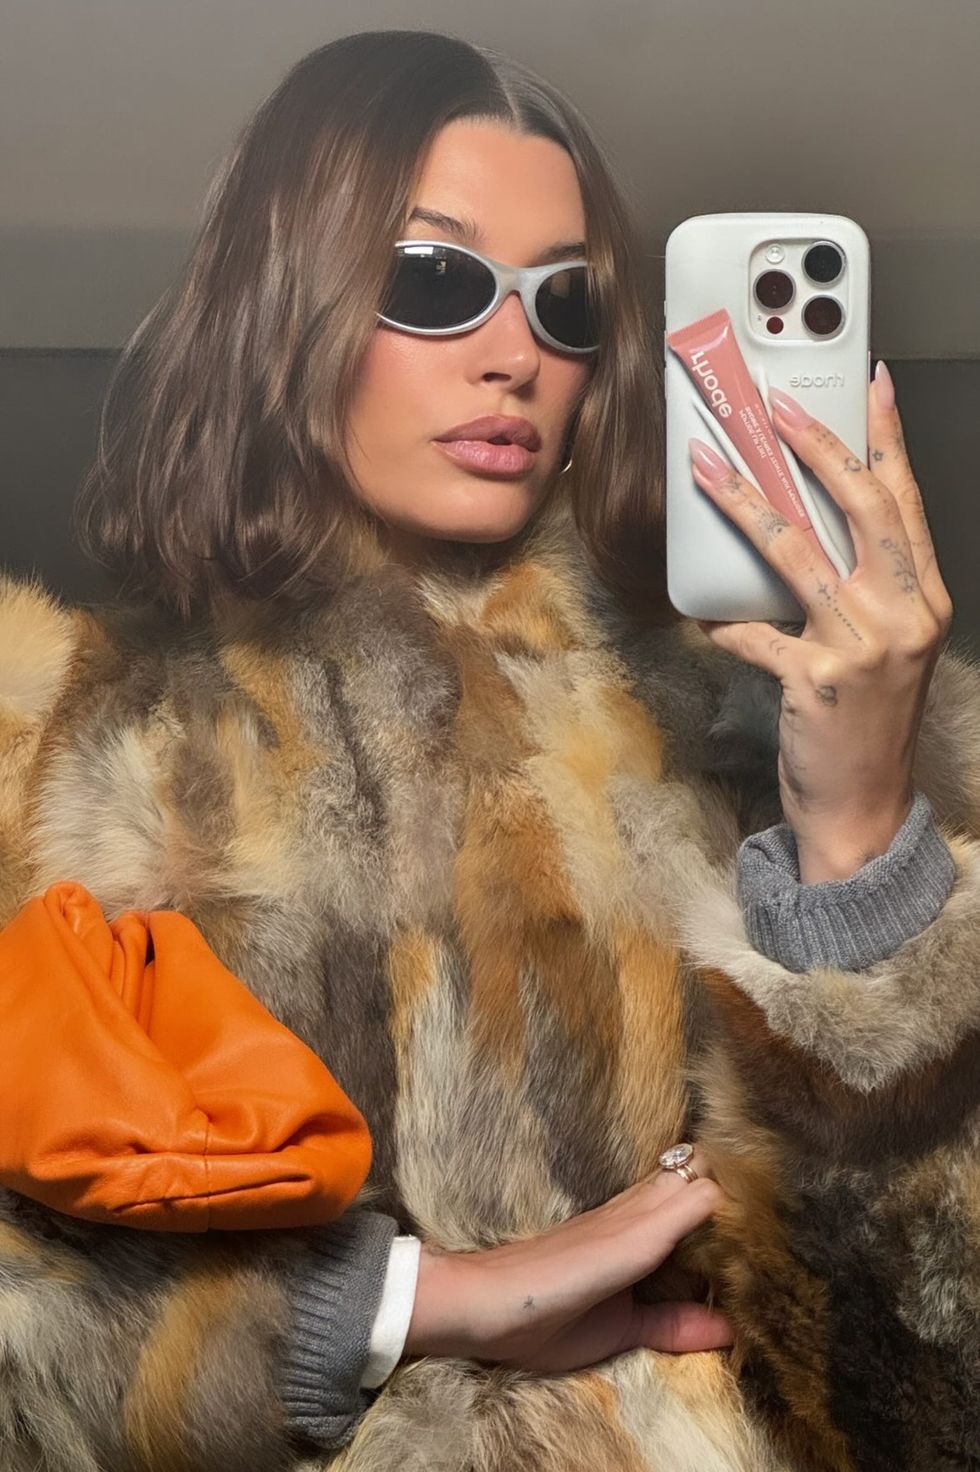 a person wearing a fur coat and sunglasses taking a selfie